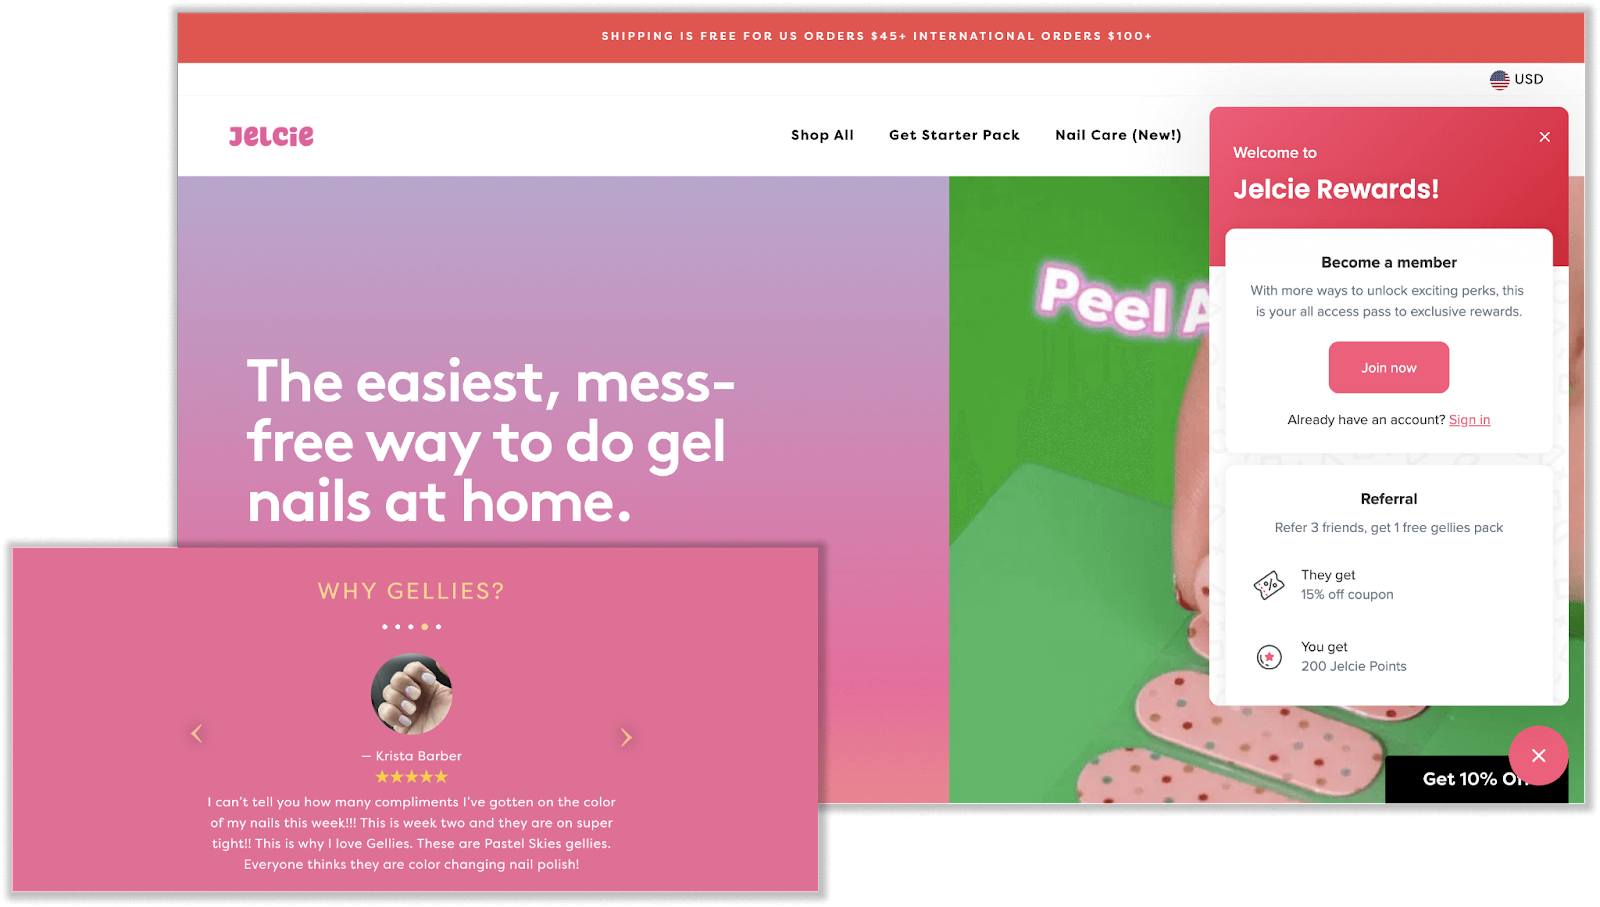 Loyalty Programs in the Beauty Industry–A screenshot of Jelcie Nails’ homepage showing their rewards program panel on the right side. On the left side, there is a review with an image of a manicured hand. The review is for 5 stars from Krista Barber and says, “I can’t tell you how many compliments I’ve gotten on the color of my nails this week!!! This is week two and they are on super tight!! This is why I love Gellies. These are Pastel Skies gellies. Everyone thinks they are color changing nail polish!”